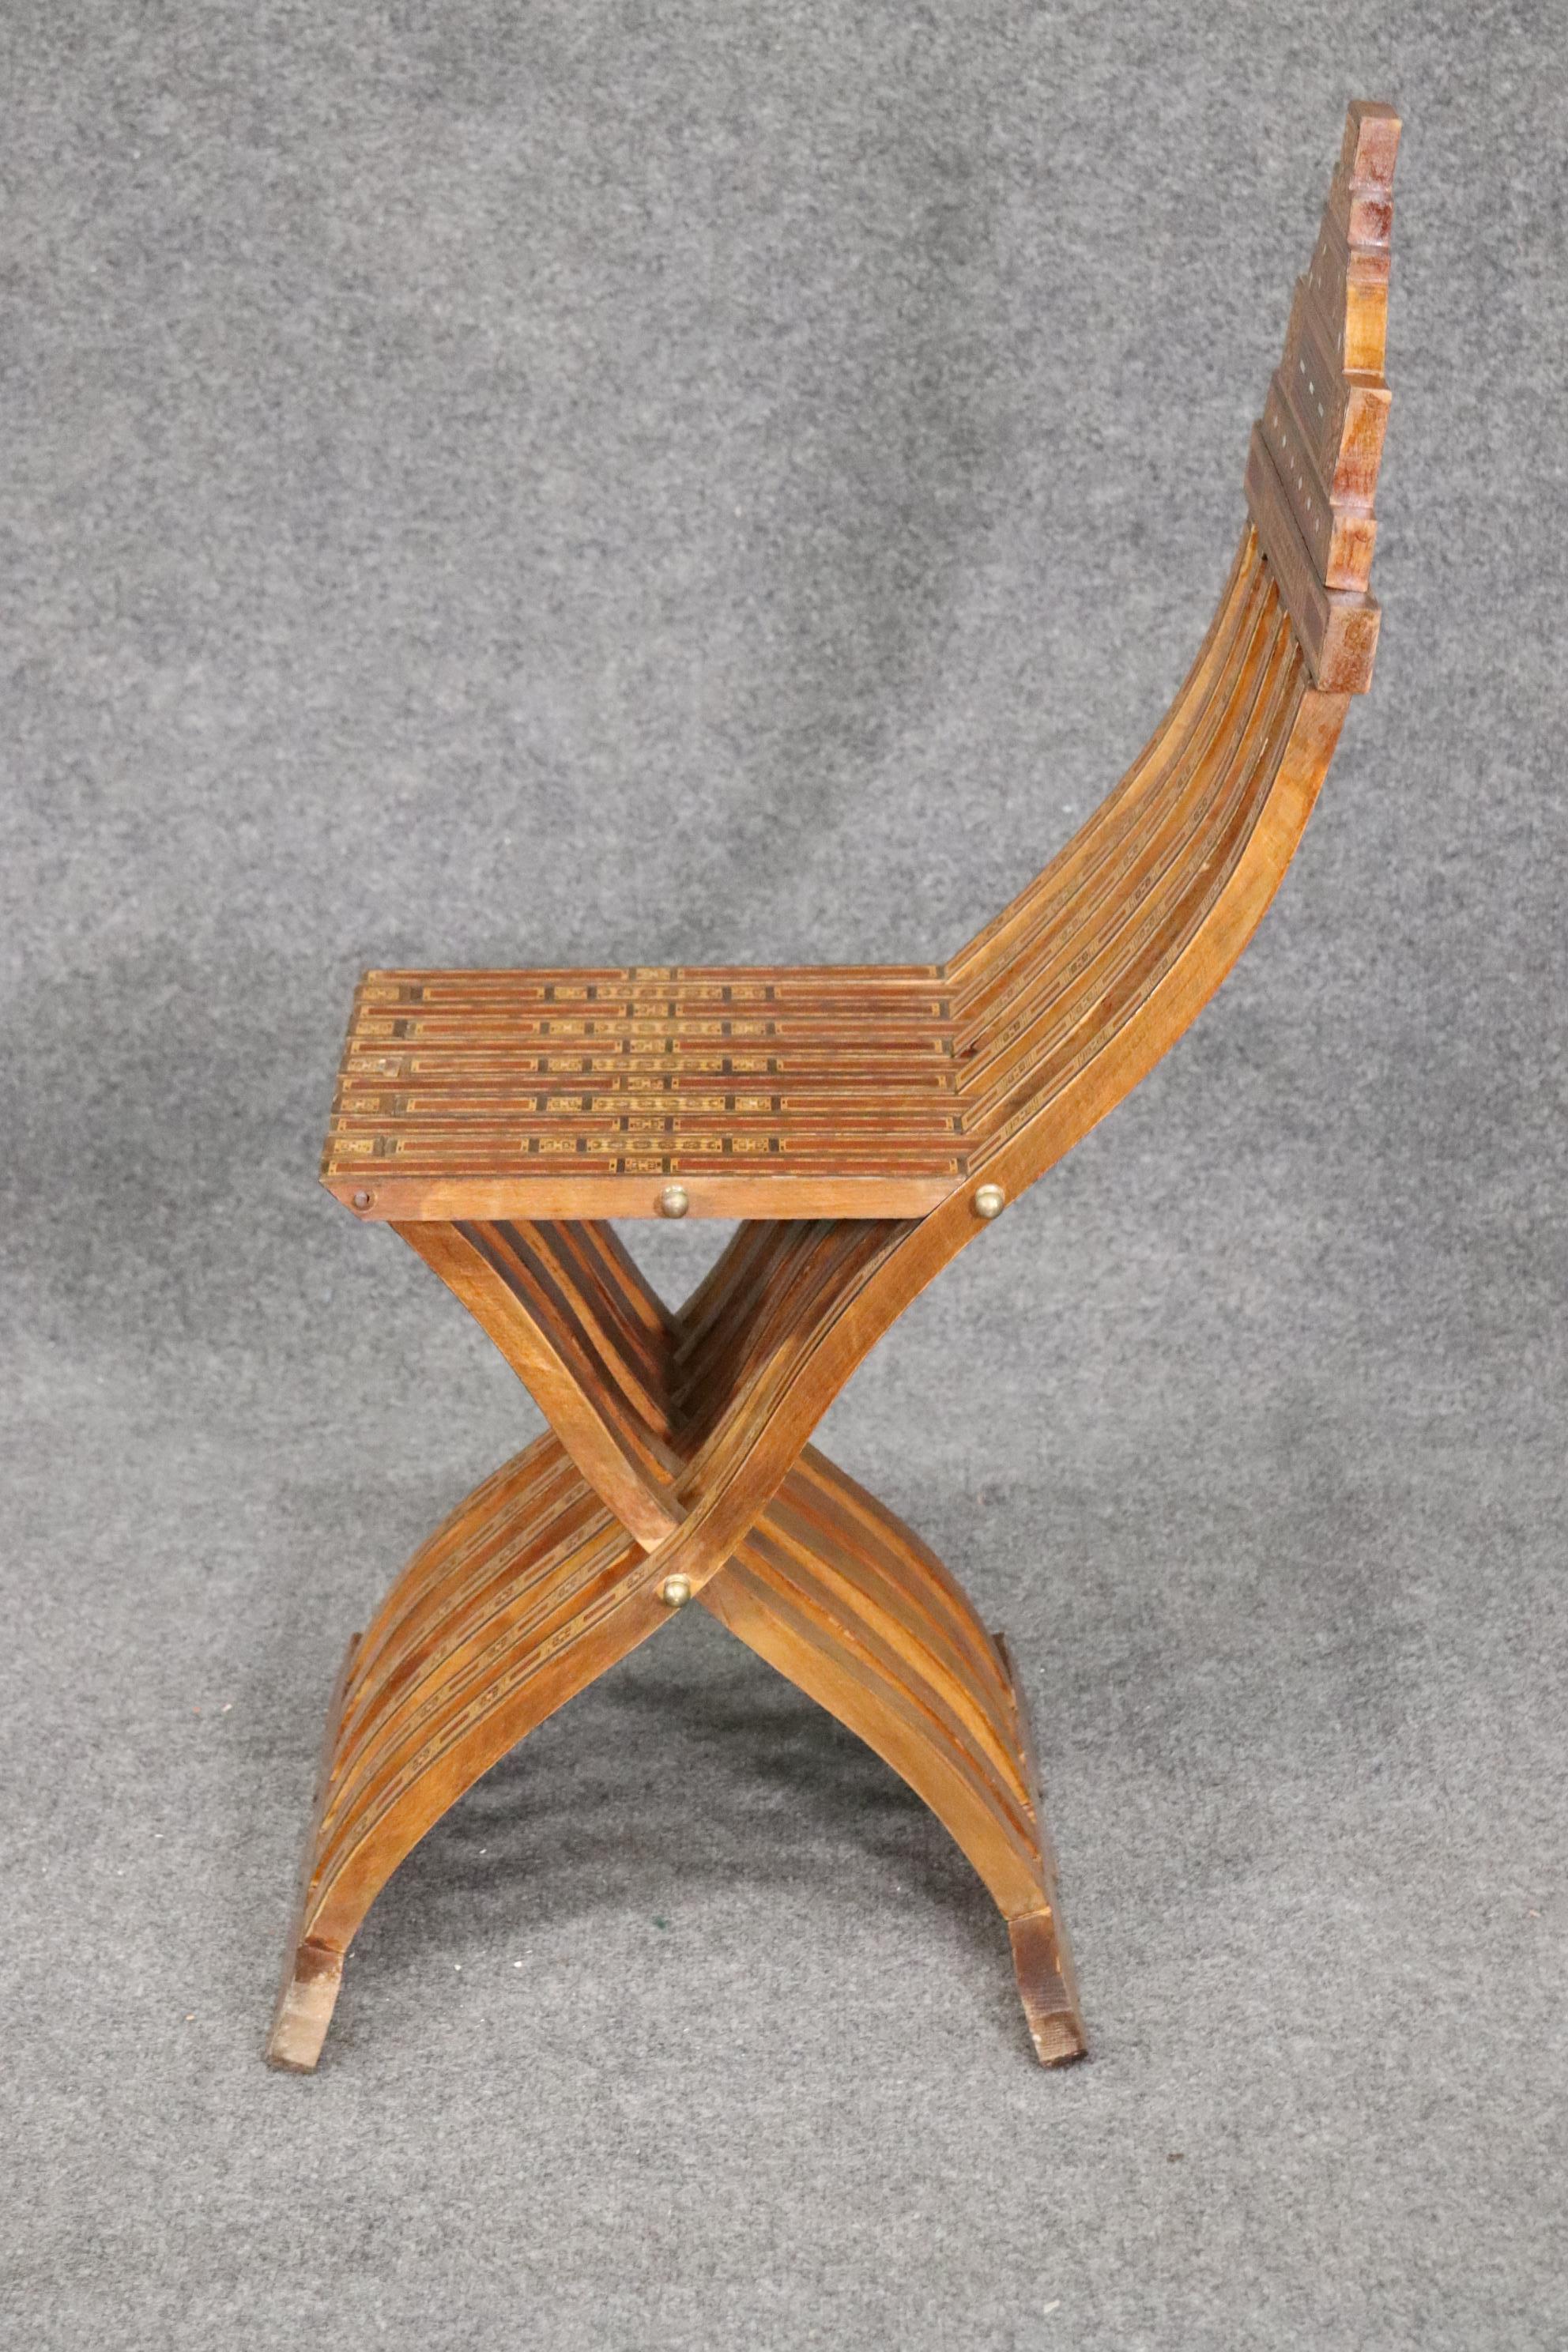 Neoclassical Revival Inlaid Folding Syrian Decorative Chair For Sale